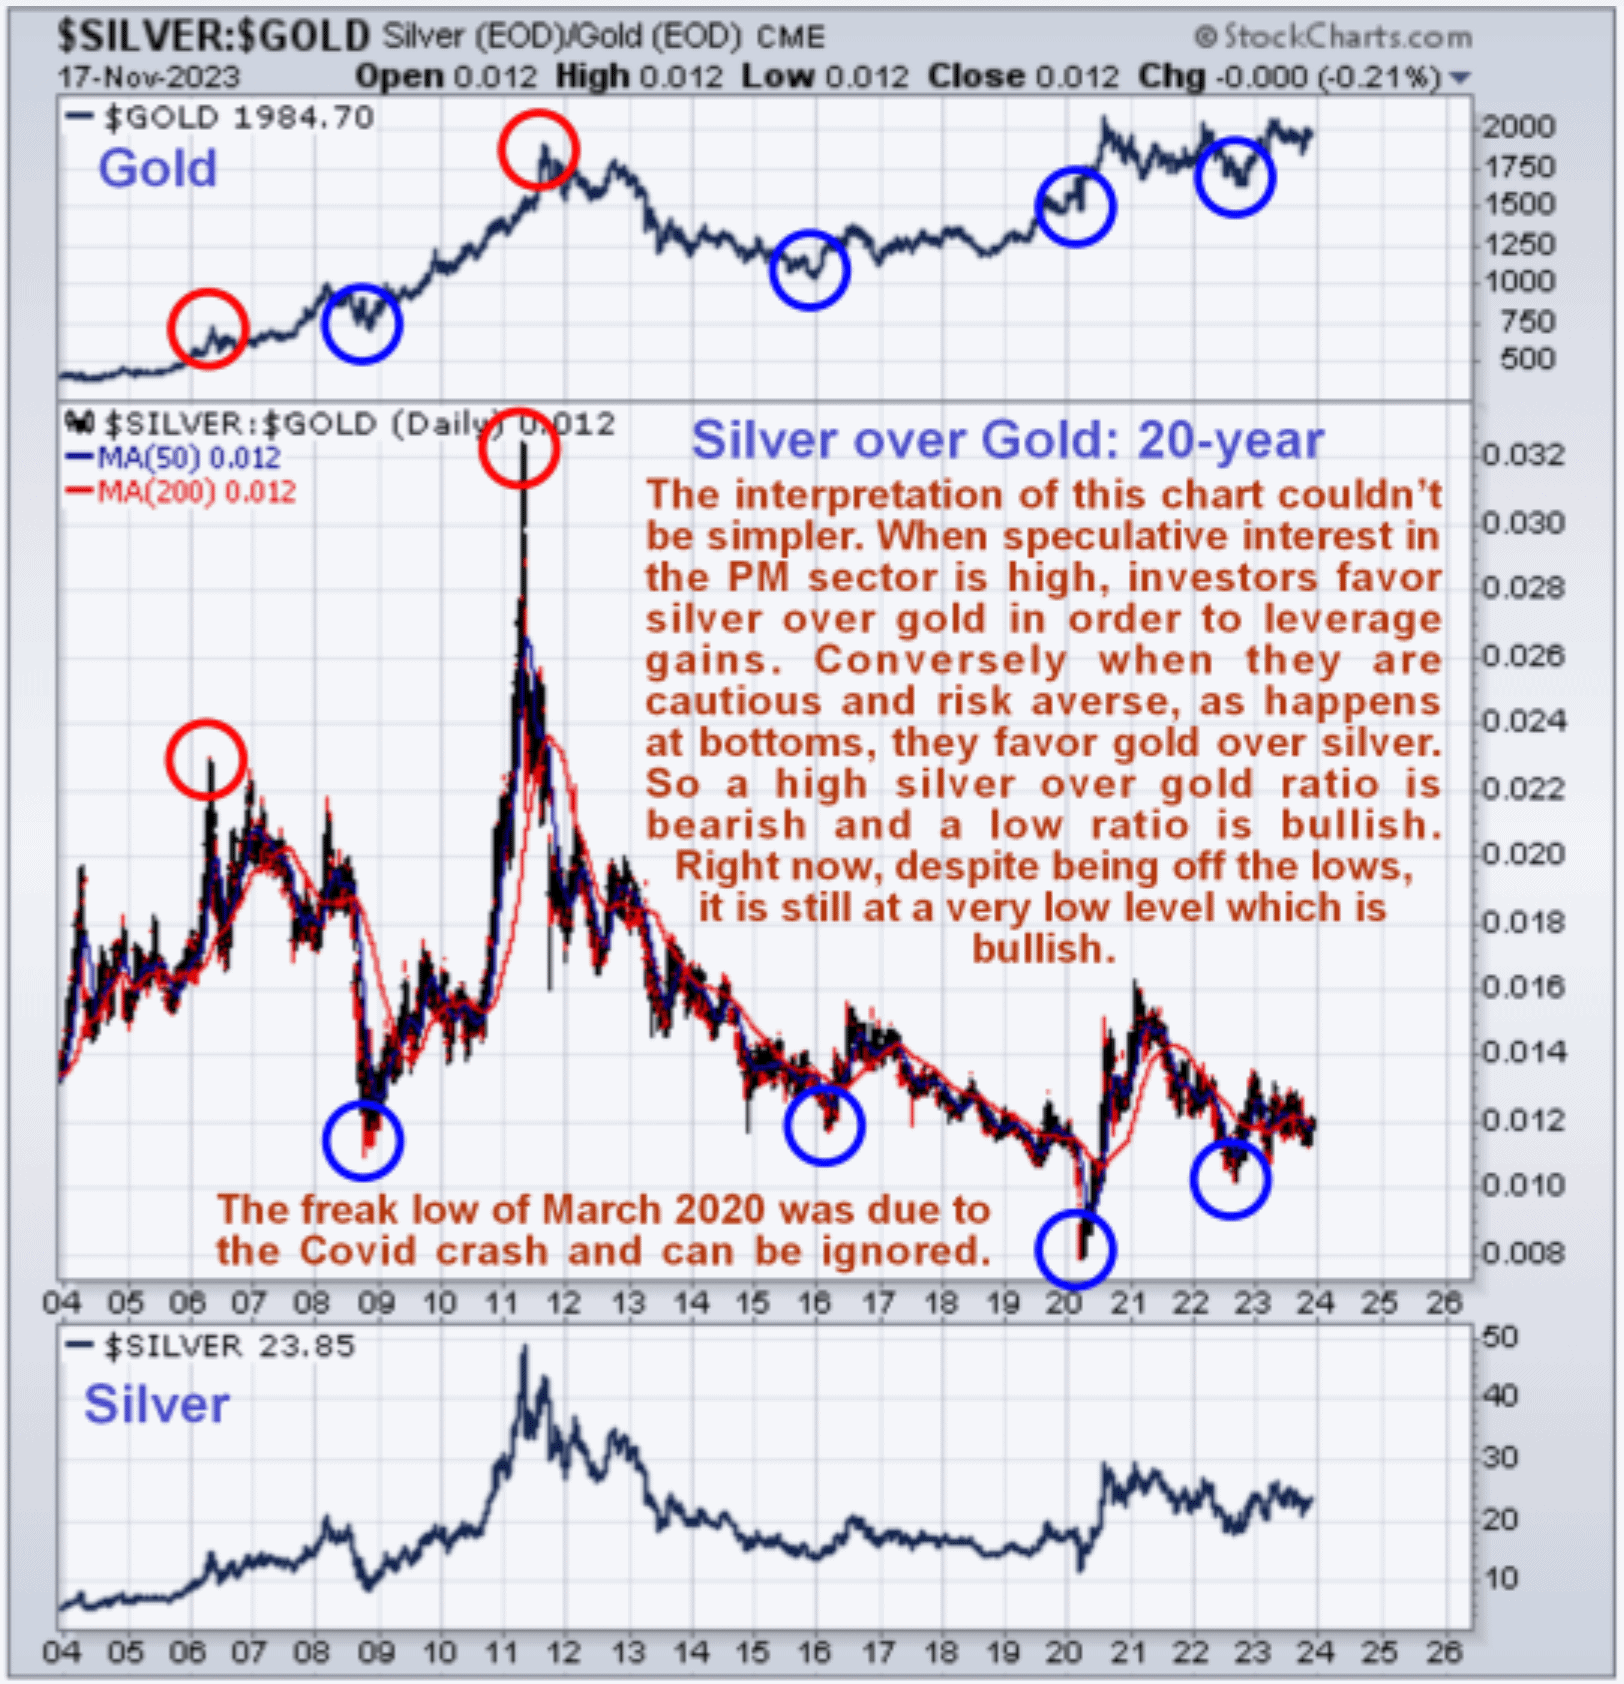 Charting the Gold-to-Silver Ratio Over 200 Years